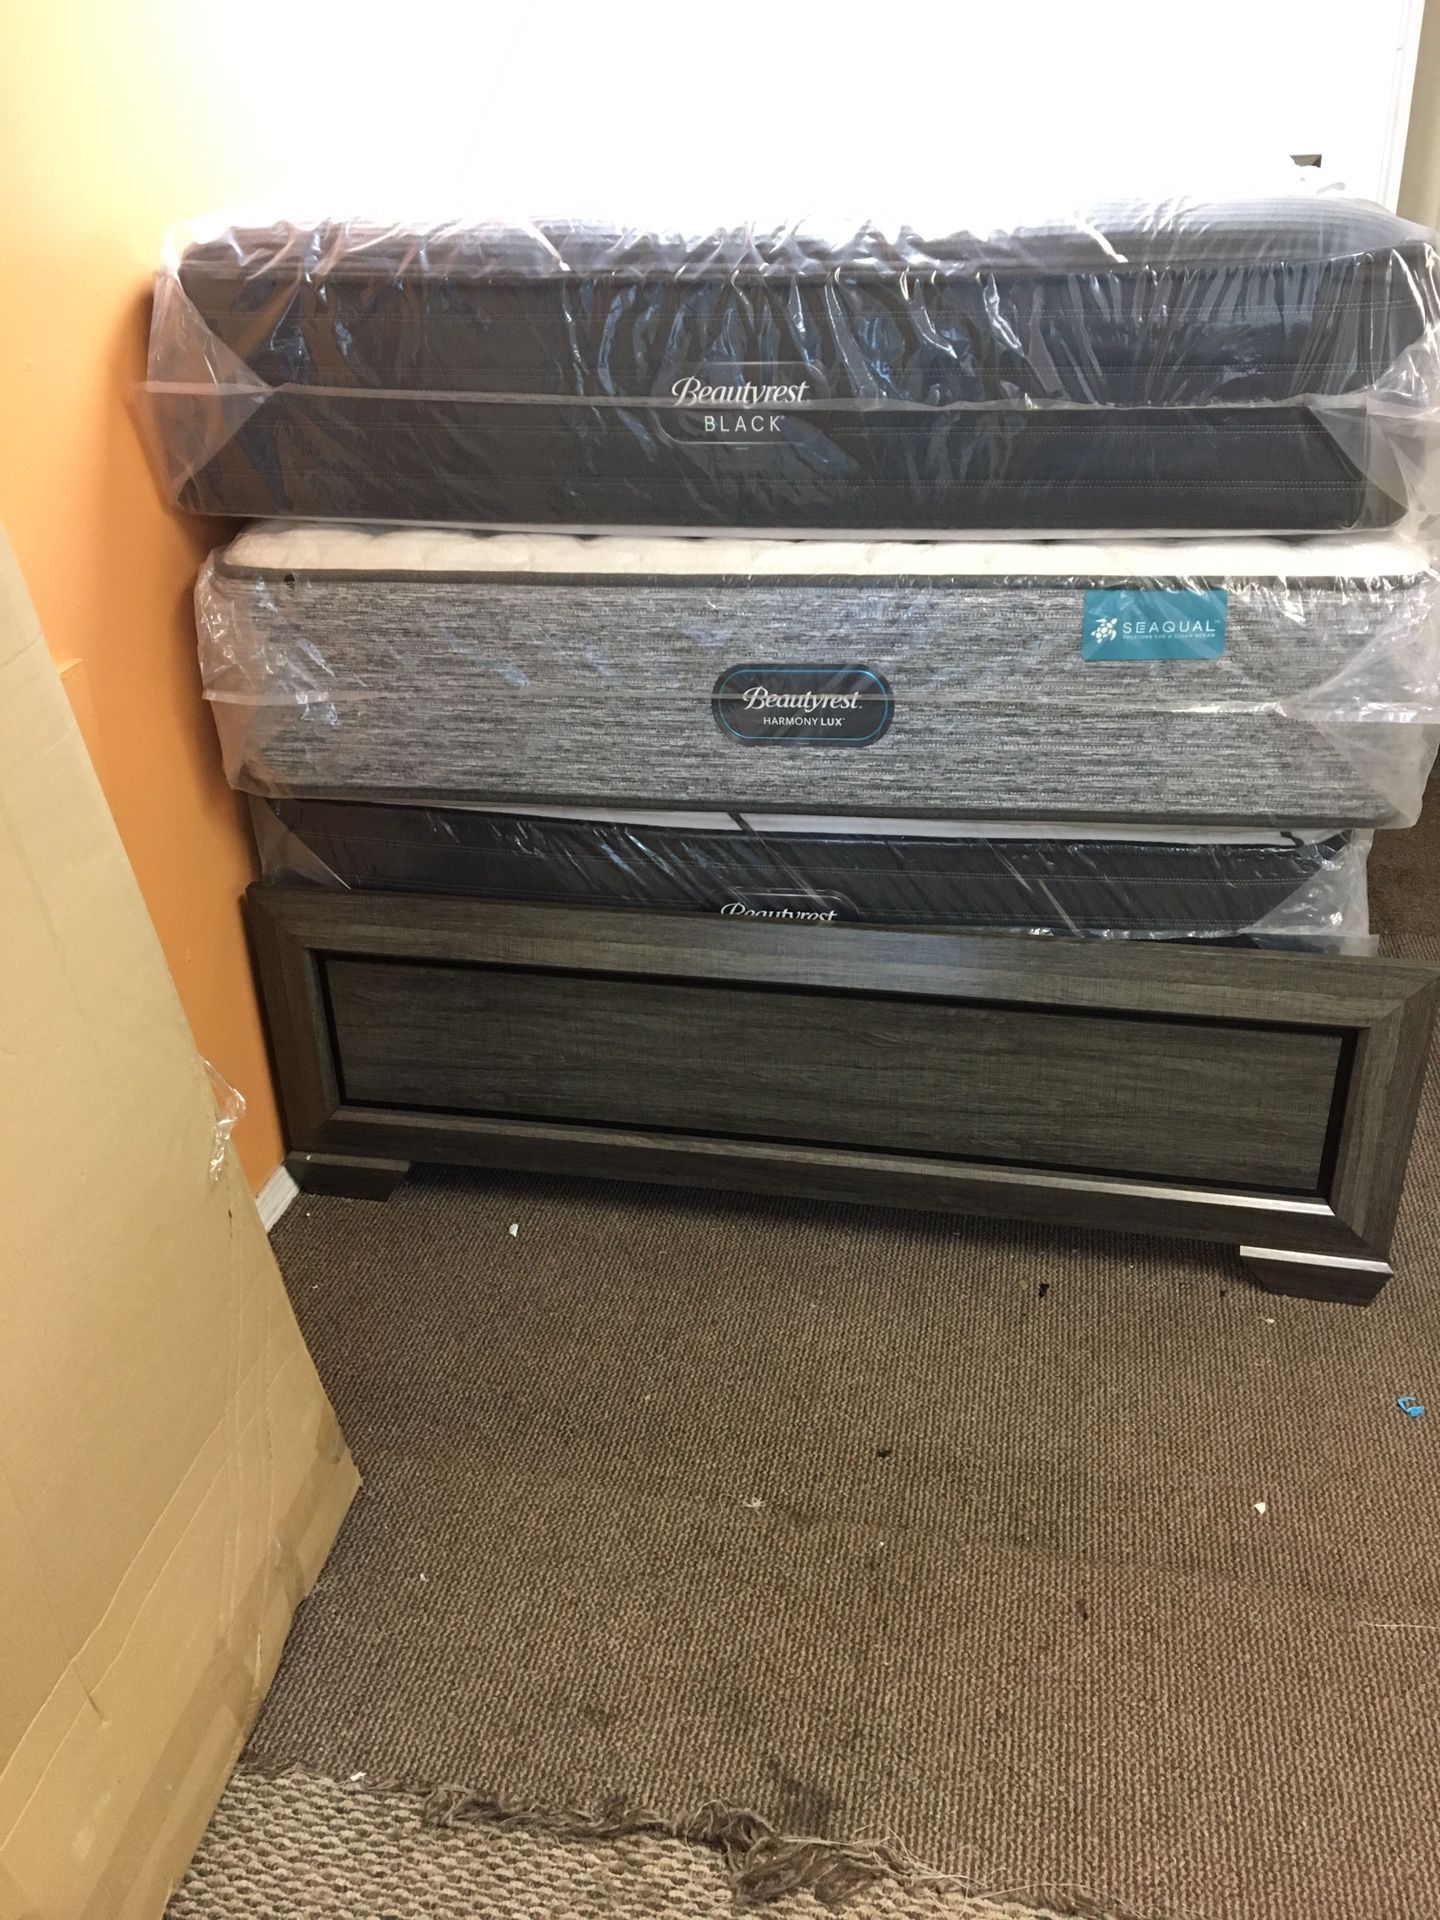 🚚 MATTRESS SALE BRAND NEW TWIN SIZE $100 FULL SIZE $169 QUEEN SIZE STARTING FROM $199 AVAILABLE DELIVERY LOCATION. 303 POCASSET AVE PROVIDENCE RI 